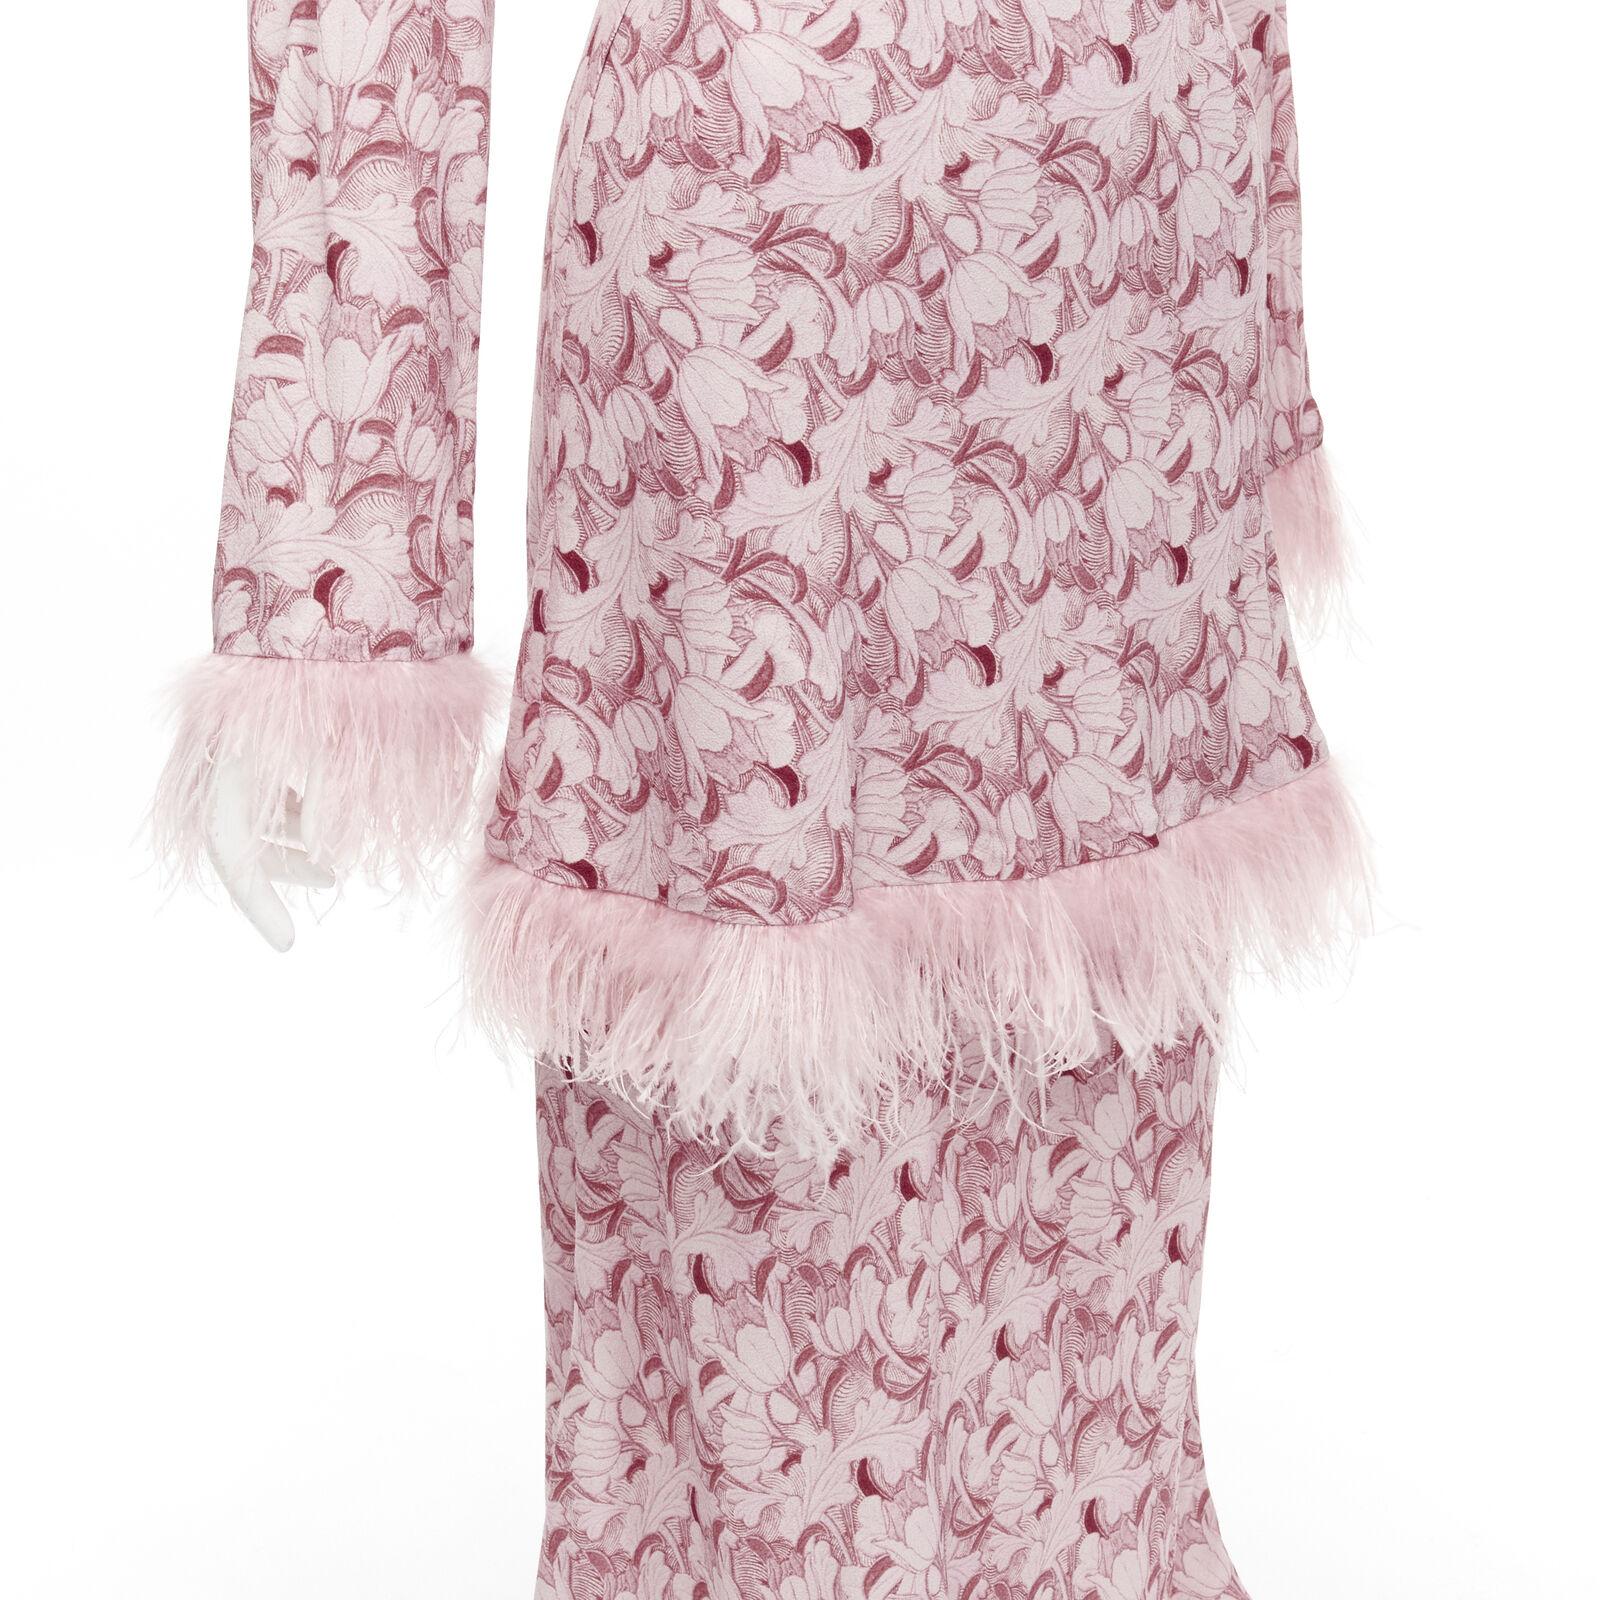 ROWEN ROSE pink Art Deco floral ostrich feather trim tiered midi dress FR34 XS
Reference: AAWC/A00199
Brand: Rowen Rose
Material: Viscose
Color: Pink
Pattern: Abstract
Closure: Zip
Extra Details: One piece dress- cannot be worn separately. Padded